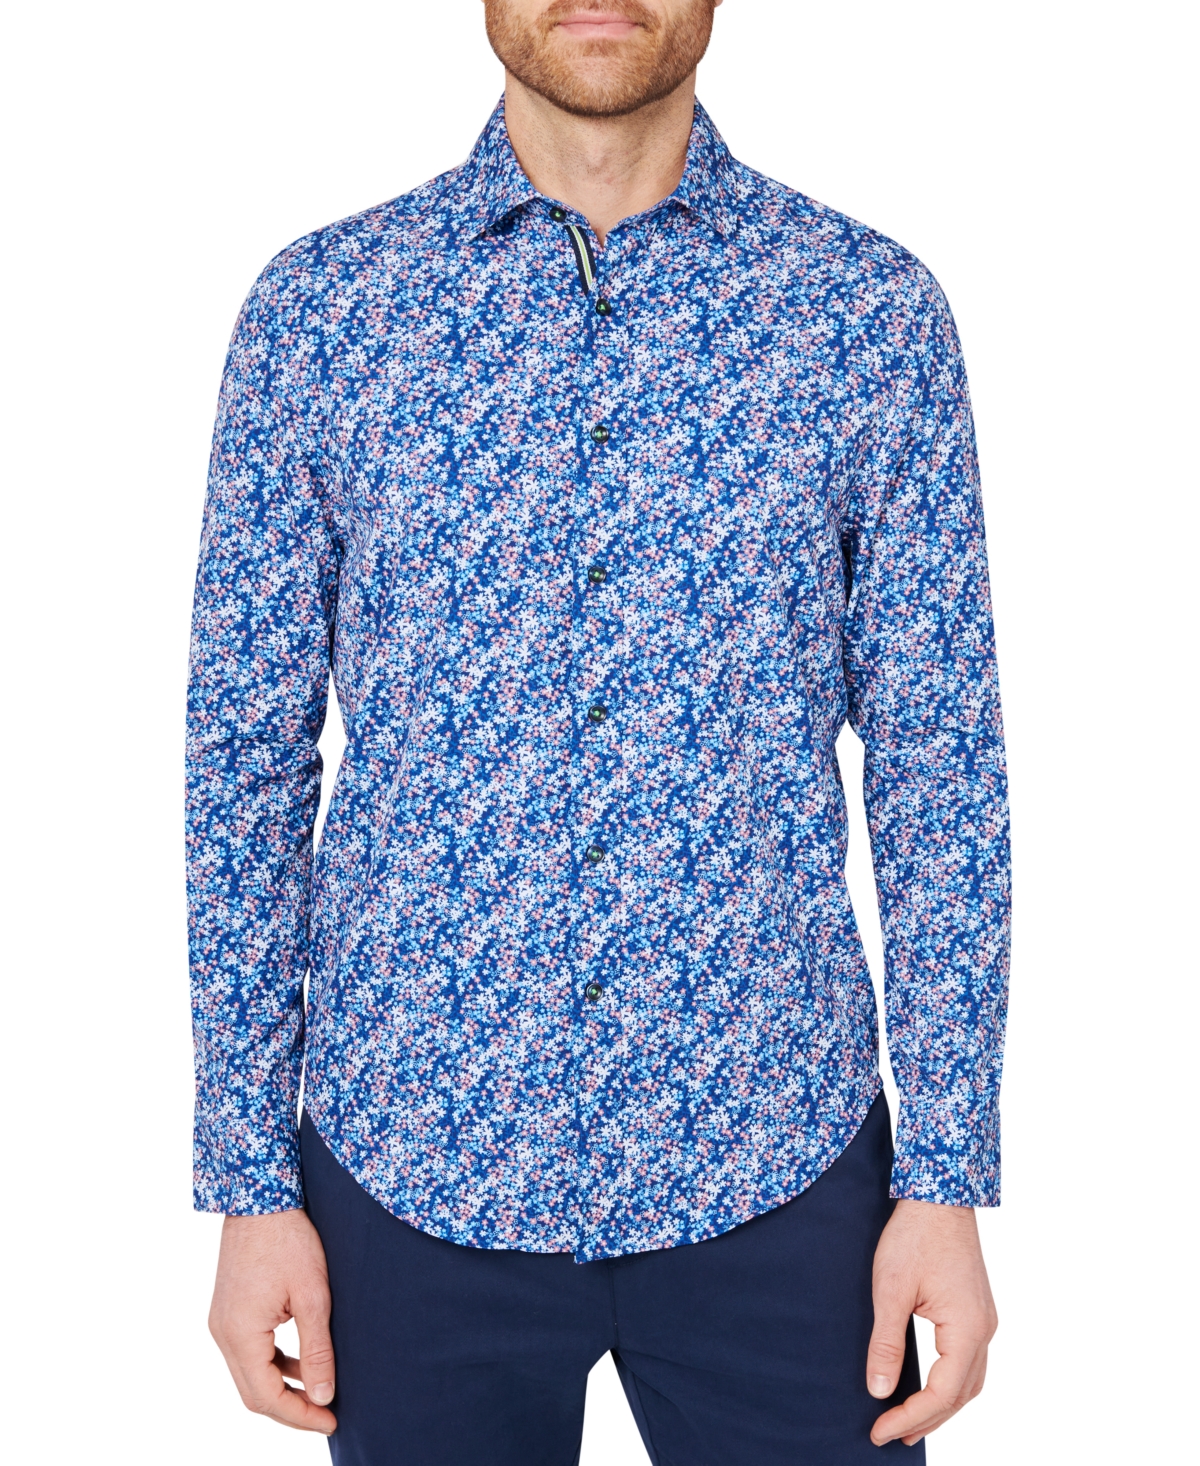 Society Of Threads Men's Slim Fit Non-iron Mini Floral Print Performance Stretch Button-down Shirt In Navy